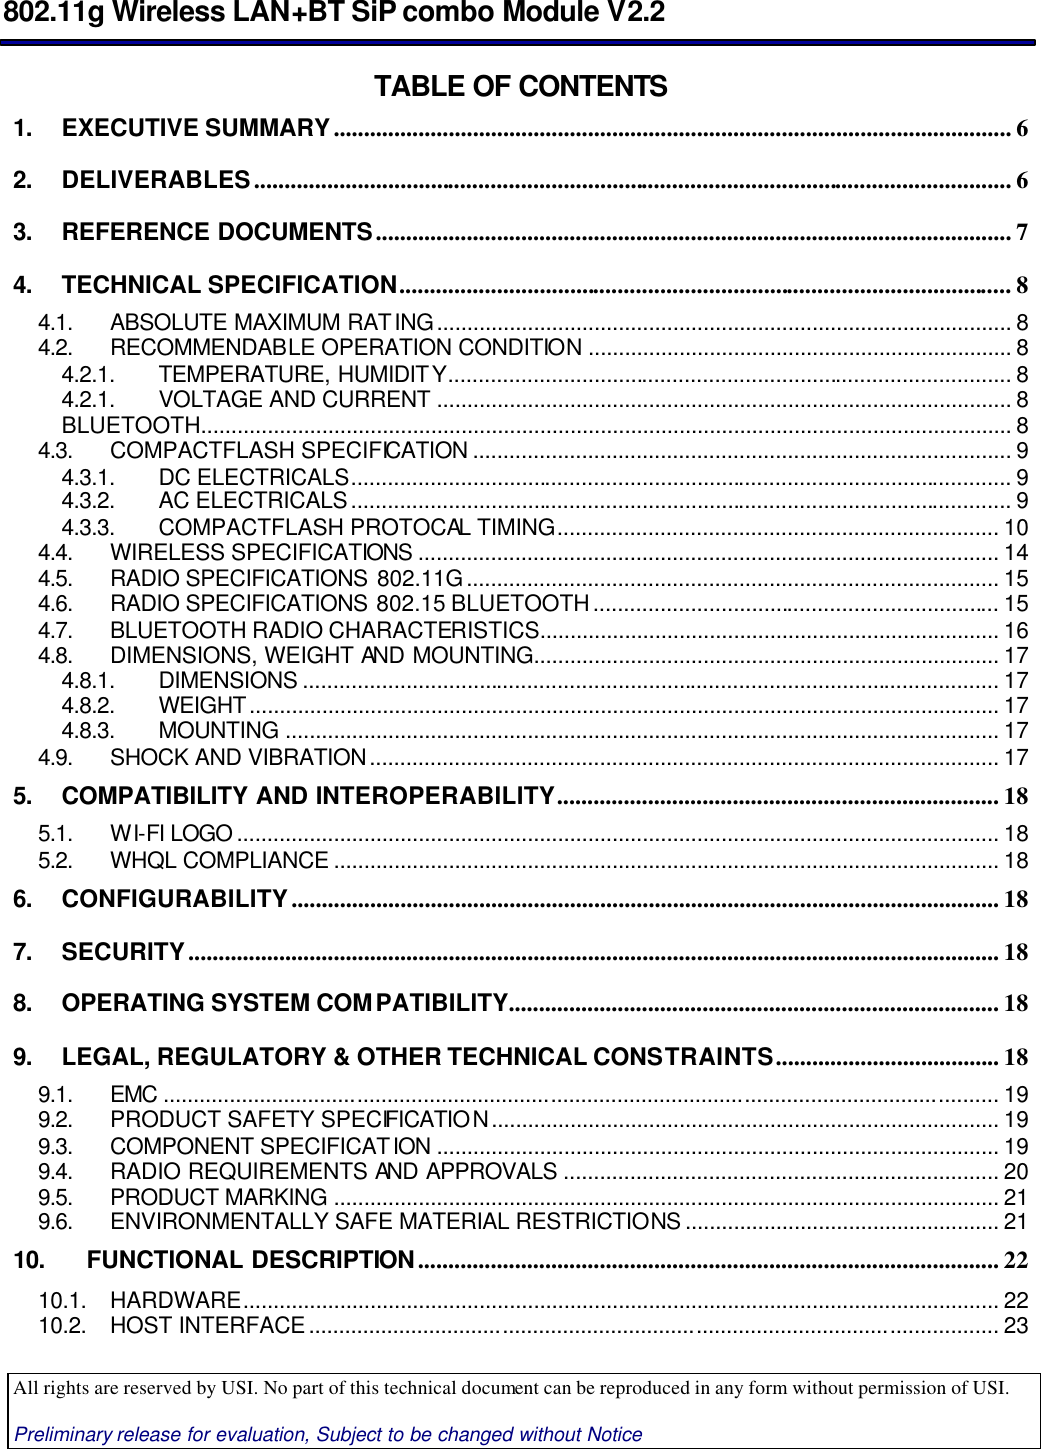  802.11g Wireless LAN+BT SiP combo Module V2.2  All rights are reserved by USI. No part of this technical document can be reproduced in any form without permission of USI.  Preliminary release for evaluation, Subject to be changed without Notice                                      TABLE OF CONTENTS 1. EXECUTIVE SUMMARY................................................................................................................ 6 2. DELIVERABLES............................................................................................................................. 6 3. REFERENCE DOCUMENTS......................................................................................................... 7 4. TECHNICAL SPECIFICATION..................................................................................................... 8 4.1. ABSOLUTE MAXIMUM RATING............................................................................................... 8 4.2. RECOMMENDABLE OPERATION CONDITION ...................................................................... 8 4.2.1. TEMPERATURE, HUMIDITY............................................................................................. 8 4.2.1. VOLTAGE AND CURRENT ............................................................................................... 8 BLUETOOTH...................................................................................................................................... 8 4.3. COMPACTFLASH SPECIFICATION ......................................................................................... 9 4.3.1. DC ELECTRICALS............................................................................................................. 9 4.3.2. AC ELECTRICALS............................................................................................................. 9 4.3.3. COMPACTFLASH PROTOCAL TIMING......................................................................... 10 4.4. WIRELESS SPECIFICATIONS ................................................................................................ 14 4.5. RADIO SPECIFICATIONS 802.11G........................................................................................ 15 4.6. RADIO SPECIFICATIONS 802.15 BLUETOOTH................................................................... 15 4.7. BLUETOOTH RADIO CHARACTERISTICS............................................................................ 16 4.8. DIMENSIONS, WEIGHT AND MOUNTING............................................................................. 17 4.8.1. DIMENSIONS ................................................................................................................... 17 4.8.2. WEIGHT............................................................................................................................ 17 4.8.3. MOUNTING ...................................................................................................................... 17 4.9. SHOCK AND VIBRATION........................................................................................................ 17 5. COMPATIBILITY AND INTEROPERABILITY......................................................................... 18 5.1. WI-FI LOGO .............................................................................................................................. 18 5.2. WHQL COMPLIANCE .............................................................................................................. 18 6. CONFIGURABILITY..................................................................................................................... 18 7. SECURITY...................................................................................................................................... 18 8. OPERATING SYSTEM COMPATIBILITY................................................................................. 18 9. LEGAL, REGULATORY &amp; OTHER TECHNICAL CONSTRAINTS..................................... 18 9.1. EMC .......................................................................................................................................... 19 9.2. PRODUCT SAFETY SPECIFICATION.................................................................................... 19 9.3. COMPONENT SPECIFICATION ............................................................................................. 19 9.4. RADIO REQUIREMENTS AND APPROVALS ........................................................................ 20 9.5. PRODUCT MARKING .............................................................................................................. 21 9.6. ENVIRONMENTALLY SAFE MATERIAL RESTRICTIONS .................................................... 21 10. FUNCTIONAL DESCRIPTION................................................................................................ 22 10.1. HARDWARE............................................................................................................................. 22 10.2. HOST INTERFACE.................................................................................................................. 23 